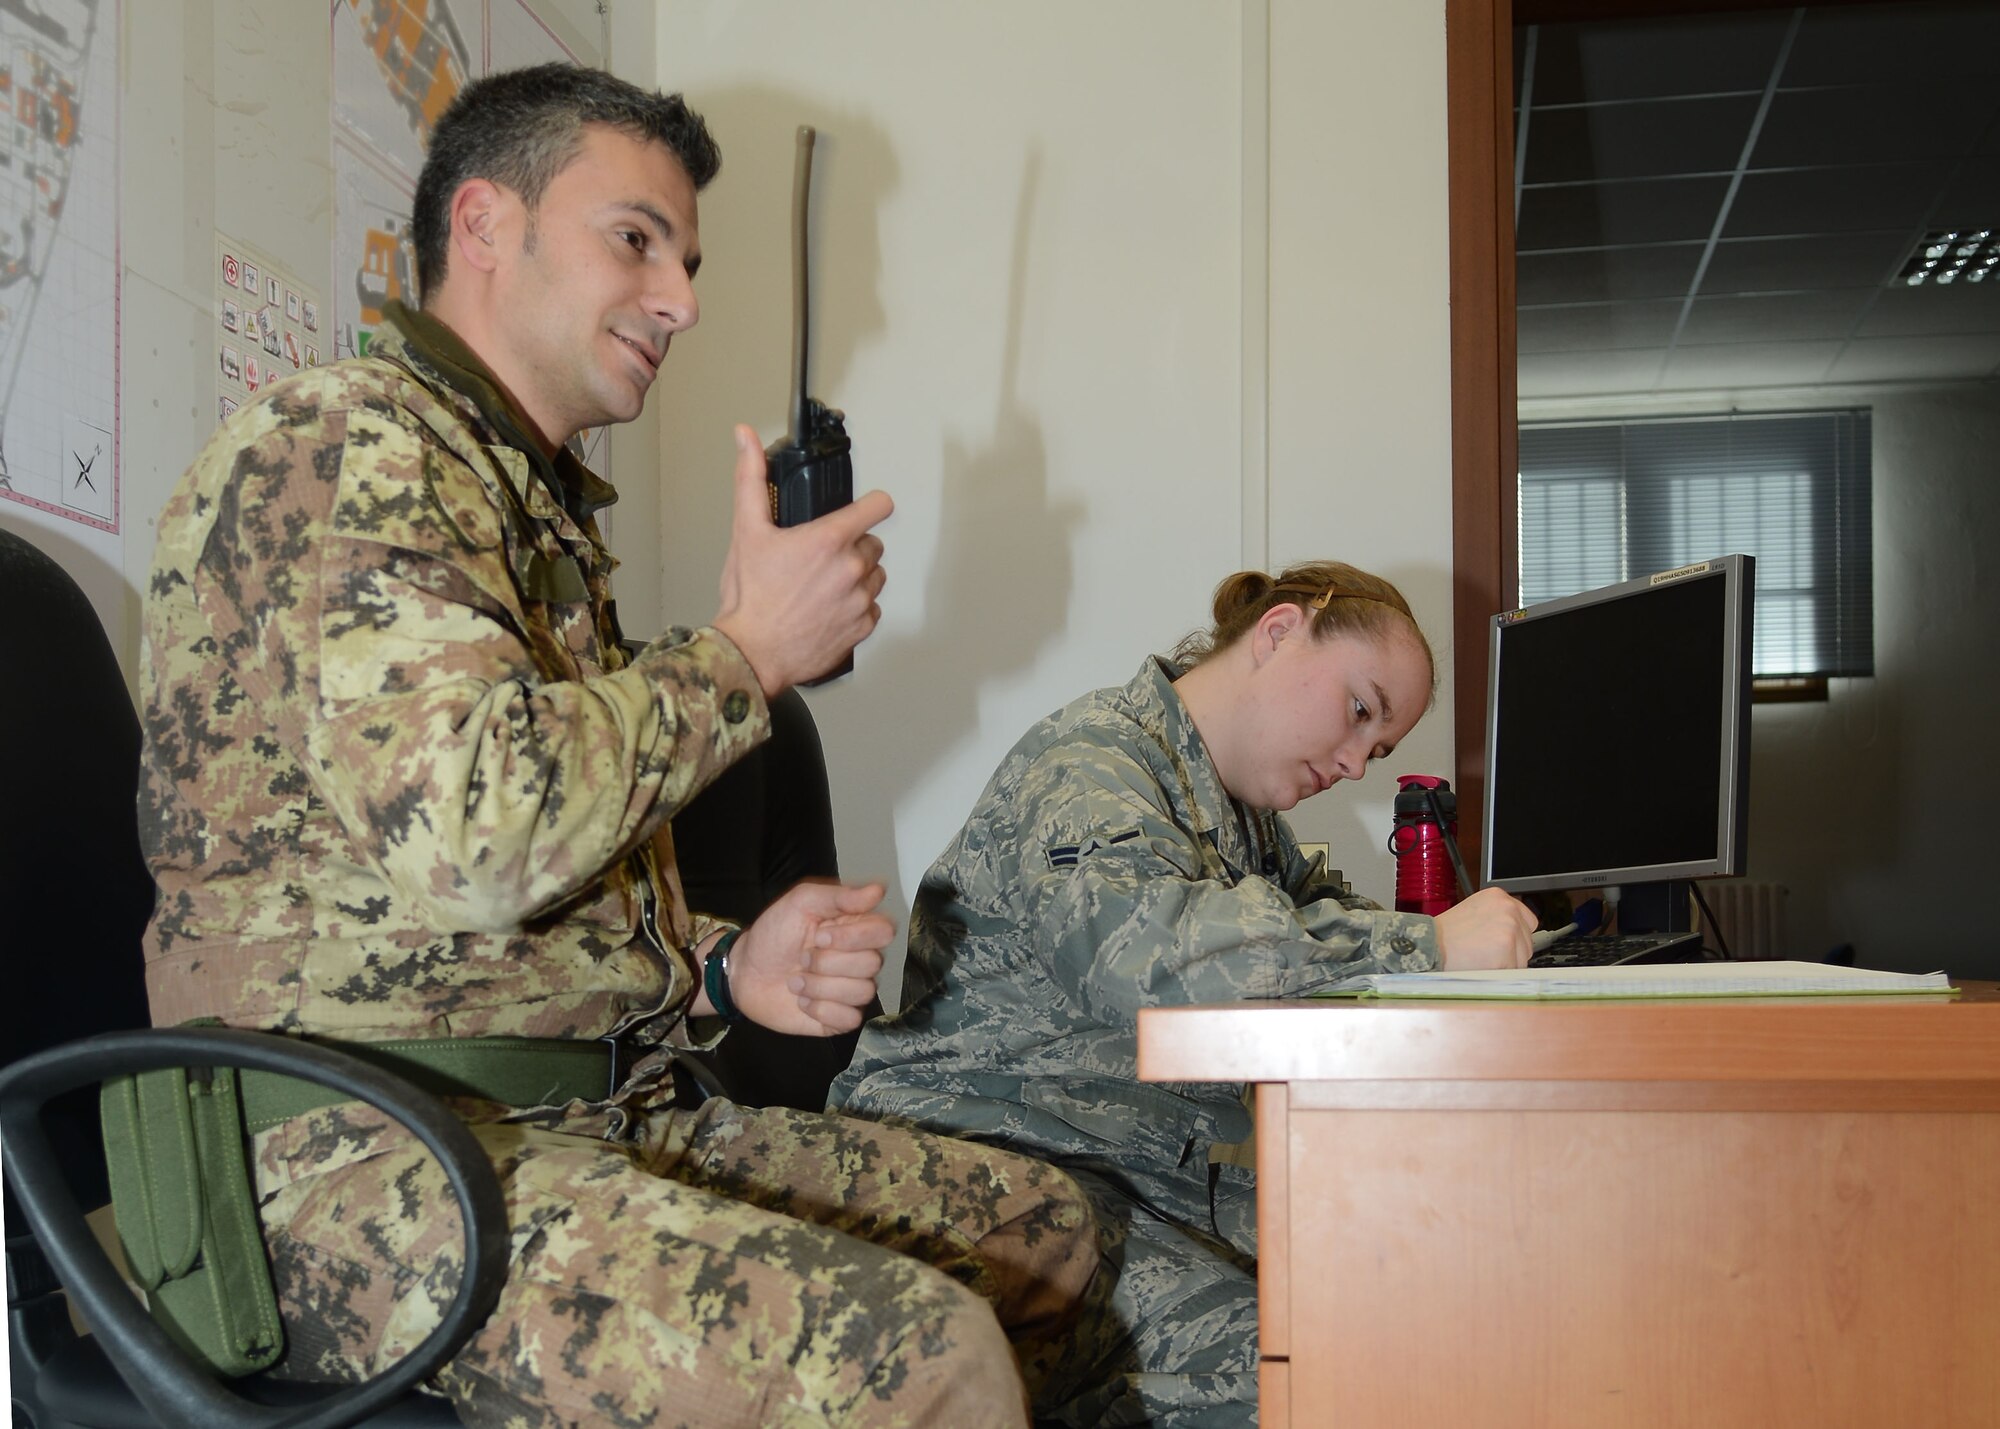 Italian air force Sgt. Marco Gallo works with and Airman 1st Class Christina Naples, 31st Security Forces Squadron, Jan. 29, 2013, in the Consolidated Operations Desk on Aviano Air Base, Italy.  The COD helps the 31st SFS and the Italian air force effectively communicate and share critical information on base.  (U.S. Air Force photo / Senior Airman Jessica Hines)